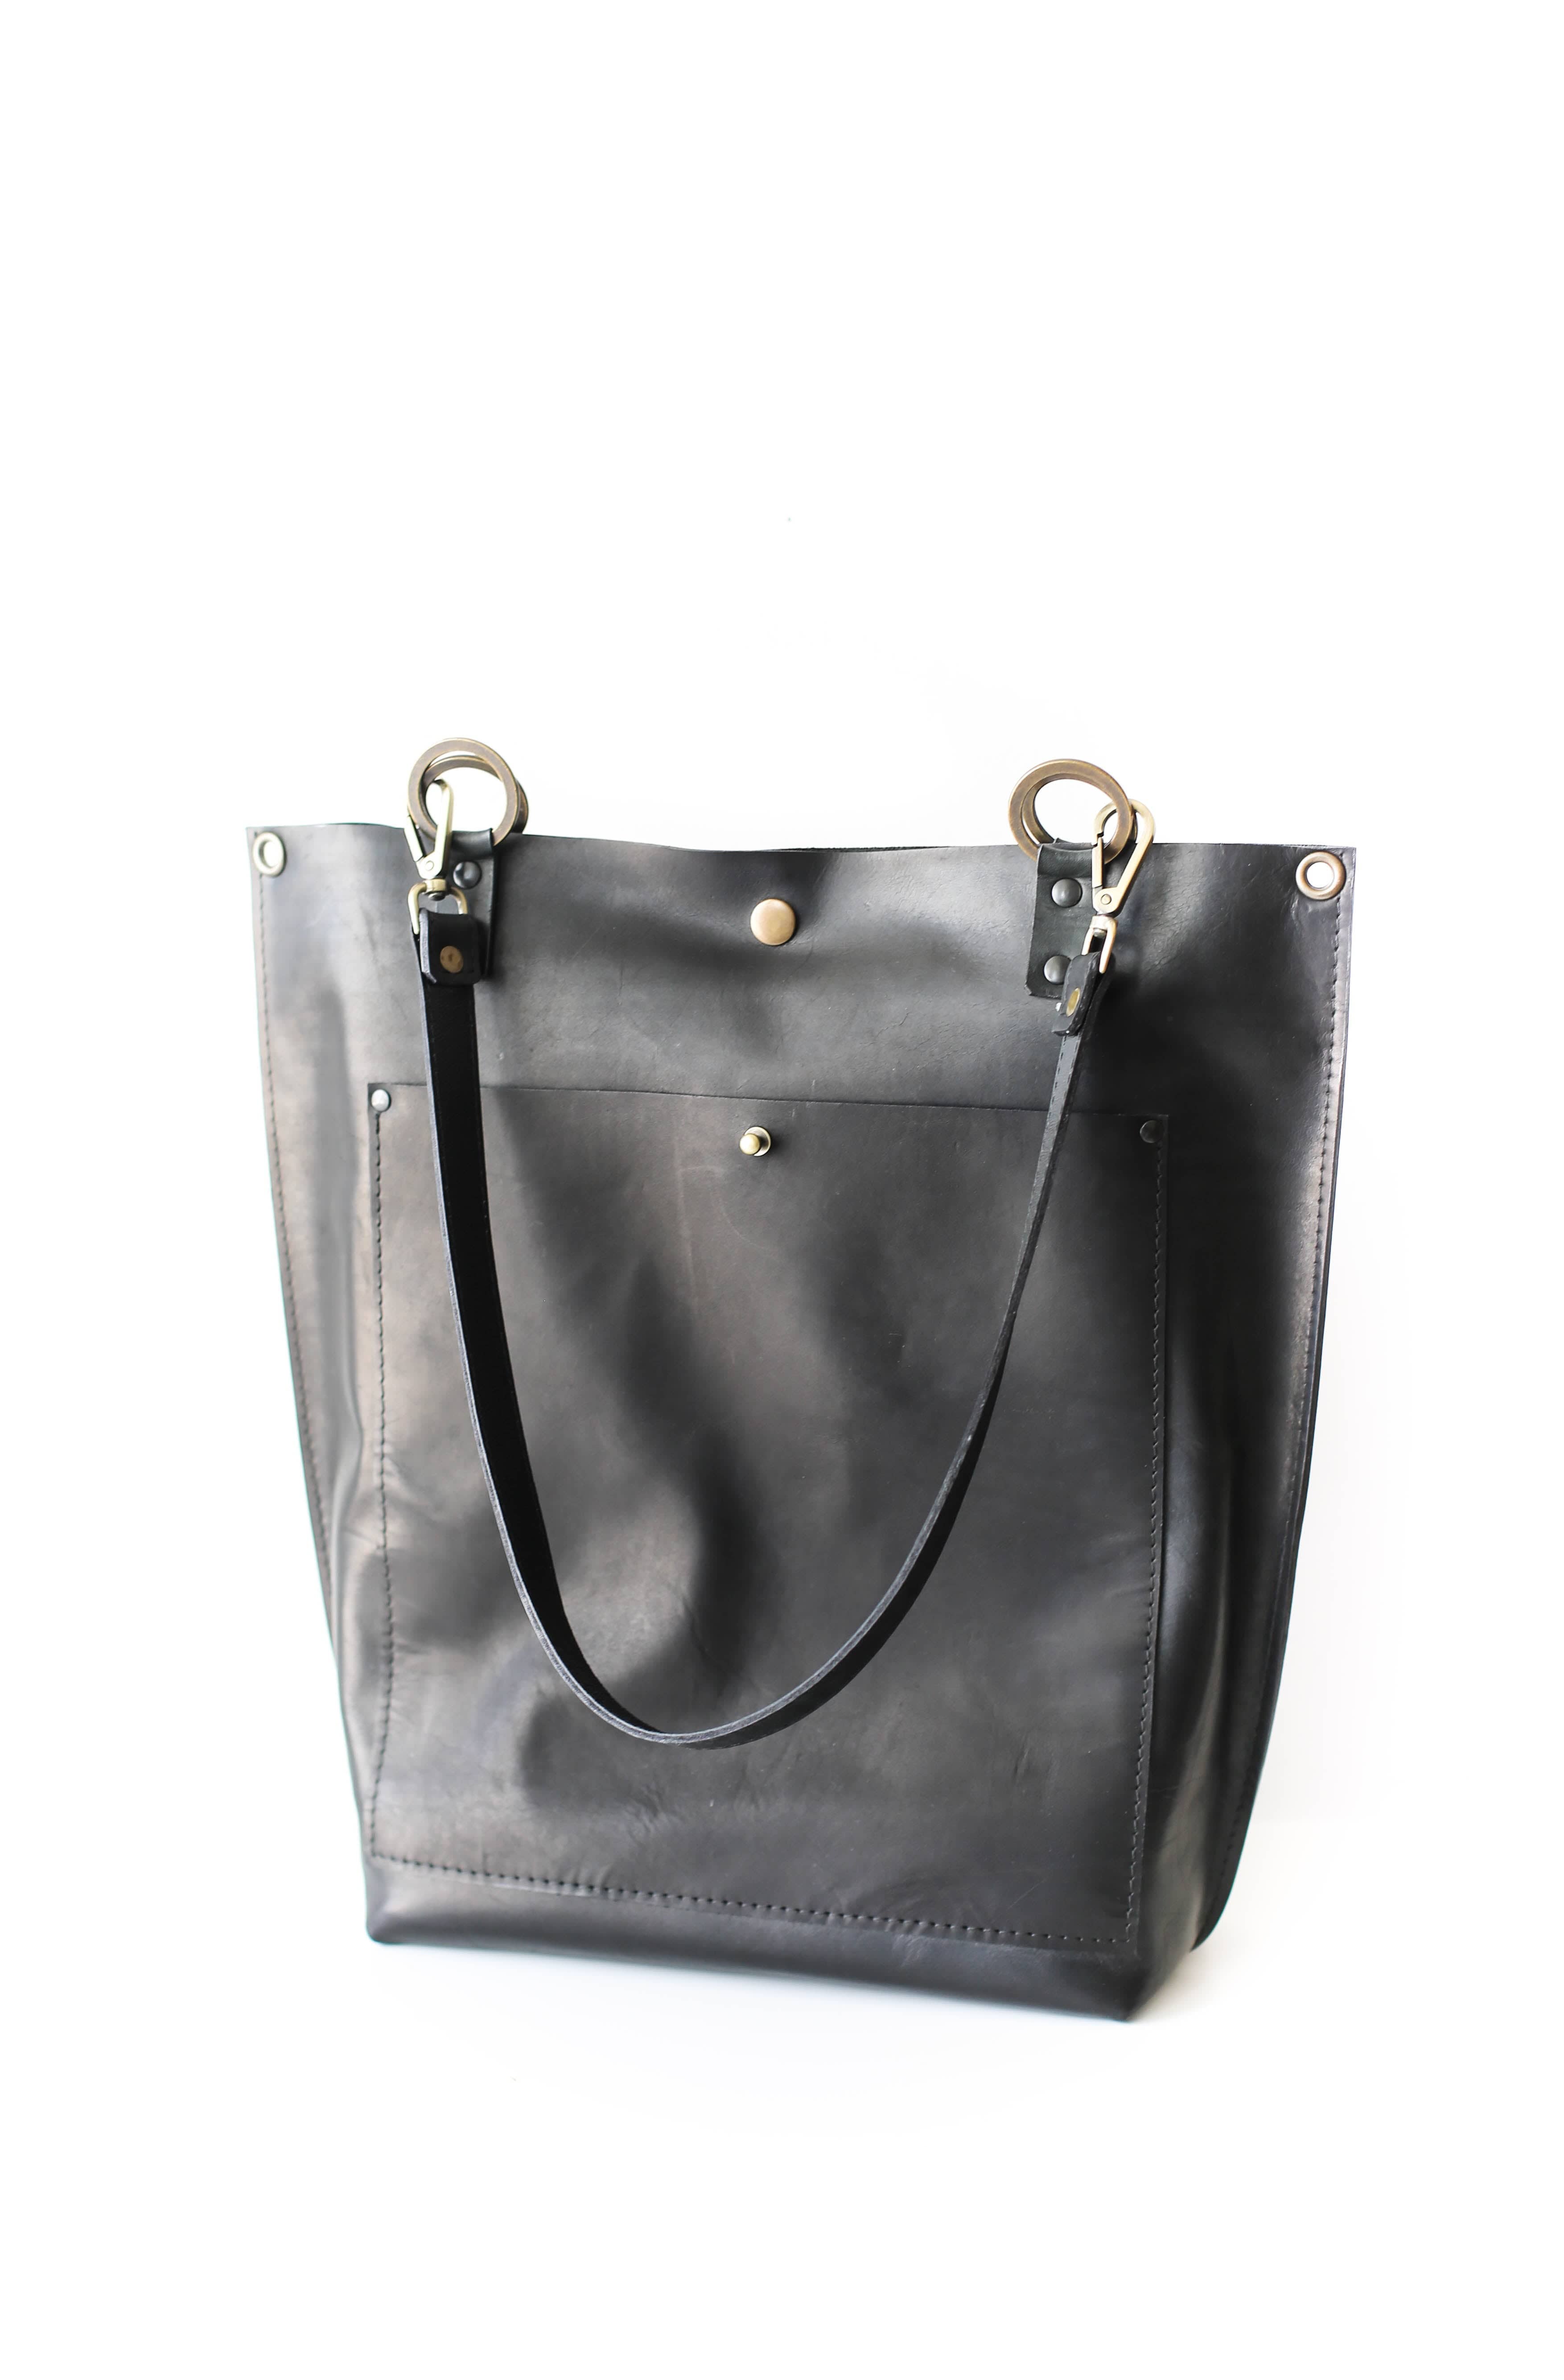 Leather Totes Bags | Genuine Leather Handbags - Qisabags